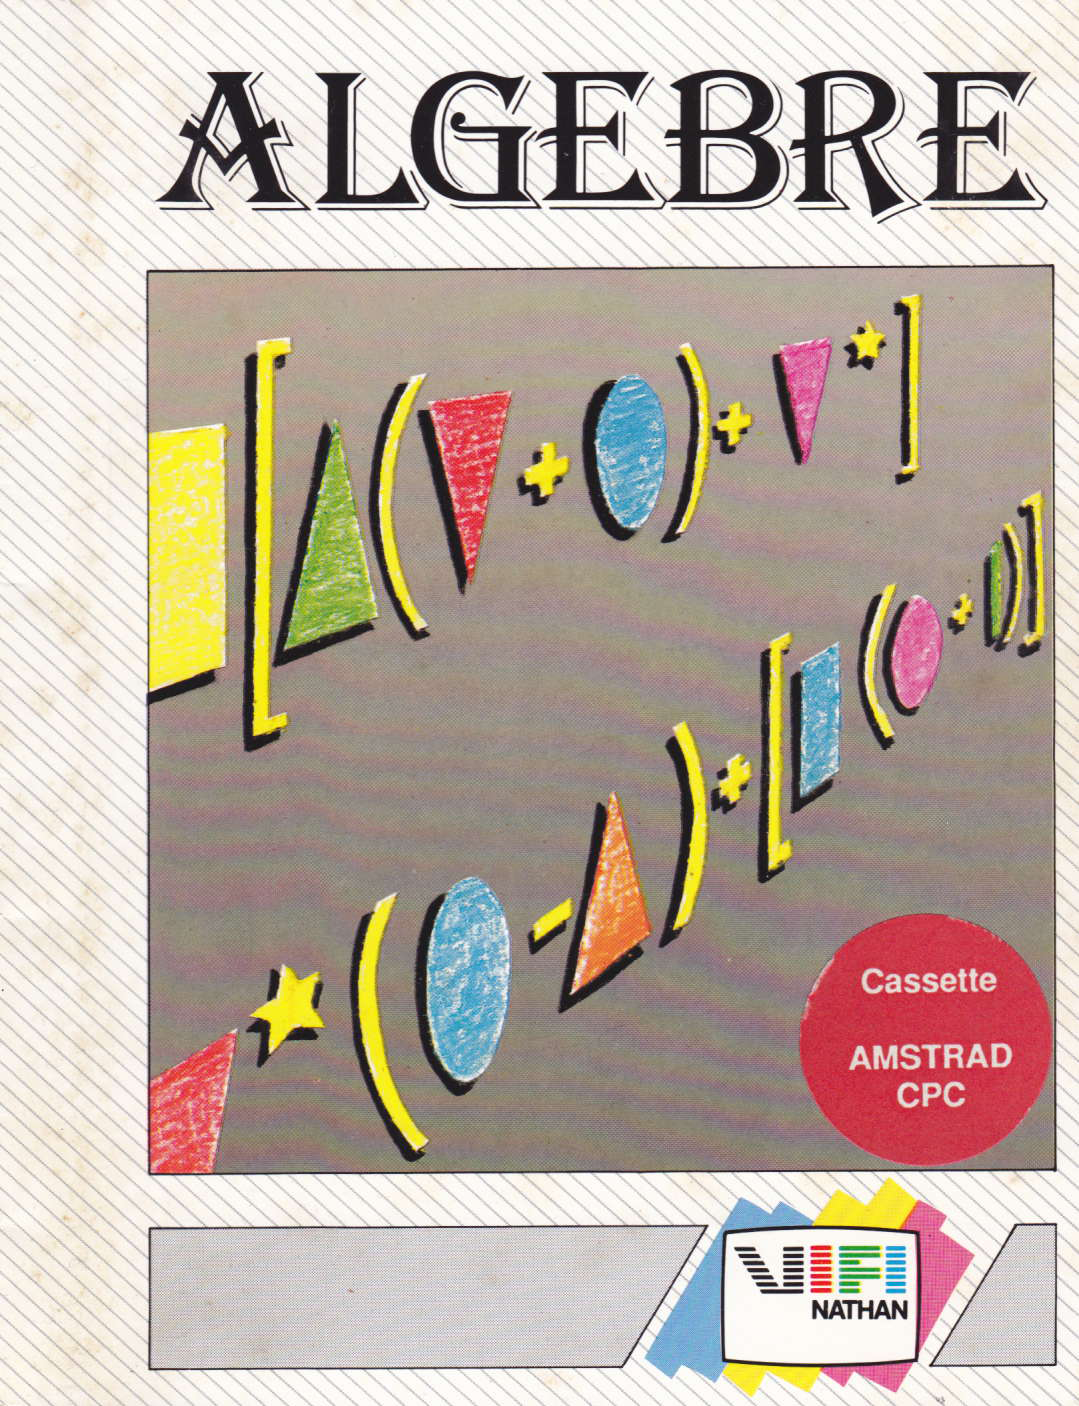 screenshot of the Amstrad CPC game Algebre by GameBase CPC